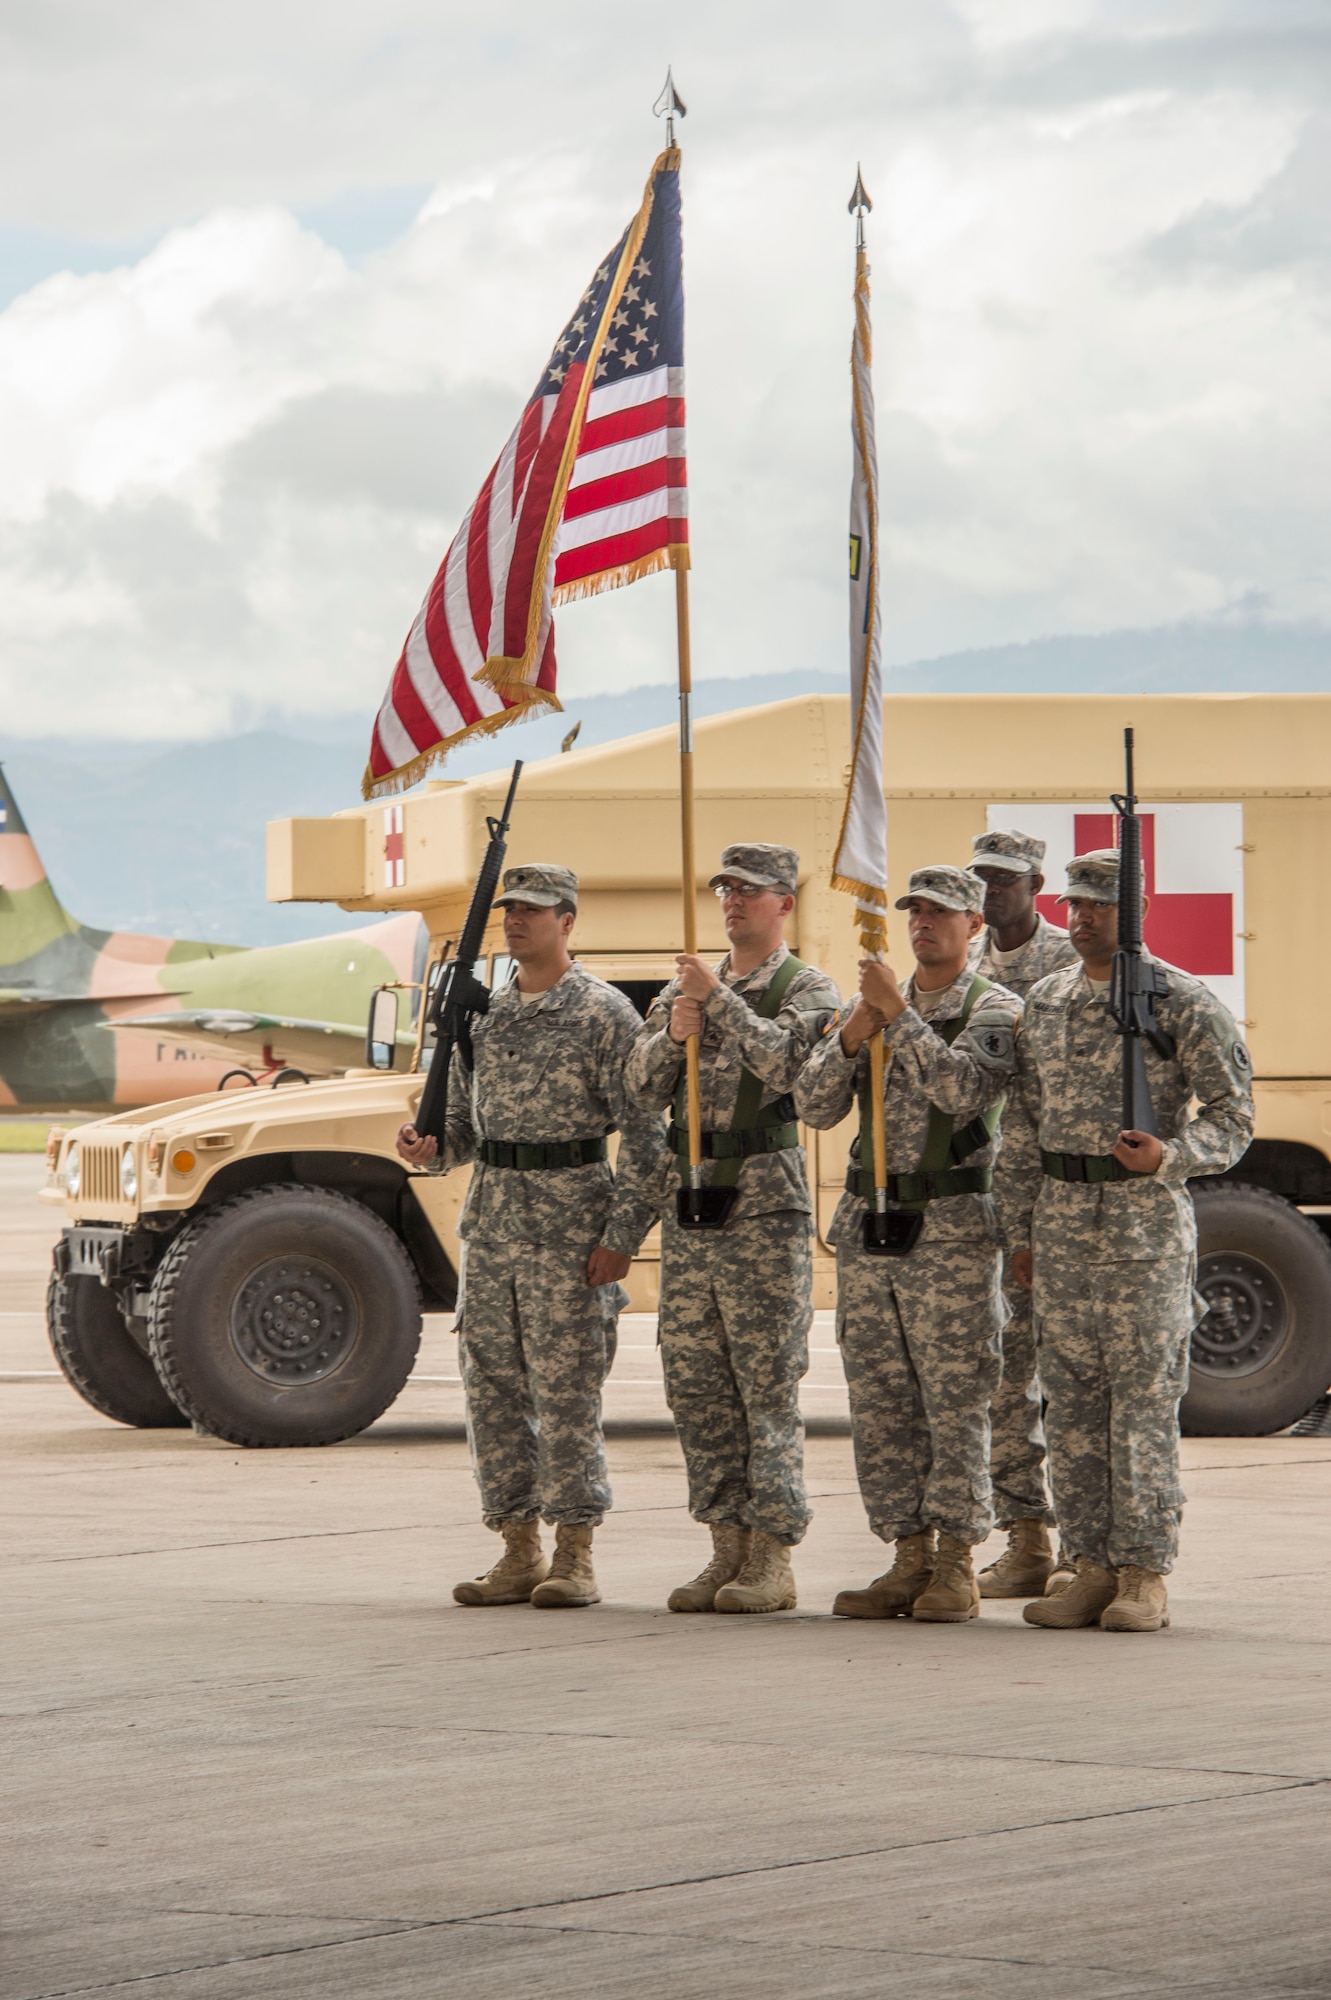 The Joint Task Force-Bravo’s Medical Element Color Guard posts the colors for the Transfer of Authority Ceremony between the 228th Combat Support Hospital and the 94th Combat Support Hospital on Soto Cano Air Base, Honduras, Oct. 31, 2014.  Over the past two weeks the 228th CSH prepared the 94th CSH to take over their U.S. Southern Command mission.  The JTF-B MEDEL is the only forward deployed medical asset with and enduring presence within SOUTHCOM.  MEDEL provides medical support to DoD beneficiaries in garrison at Soto Cano AB, as well as supporting SOUTHCOM’s humanitarian assistance and disaster relief efforts.  (U.S. Air Force photo/Tech. Sgt. Heather Redman)